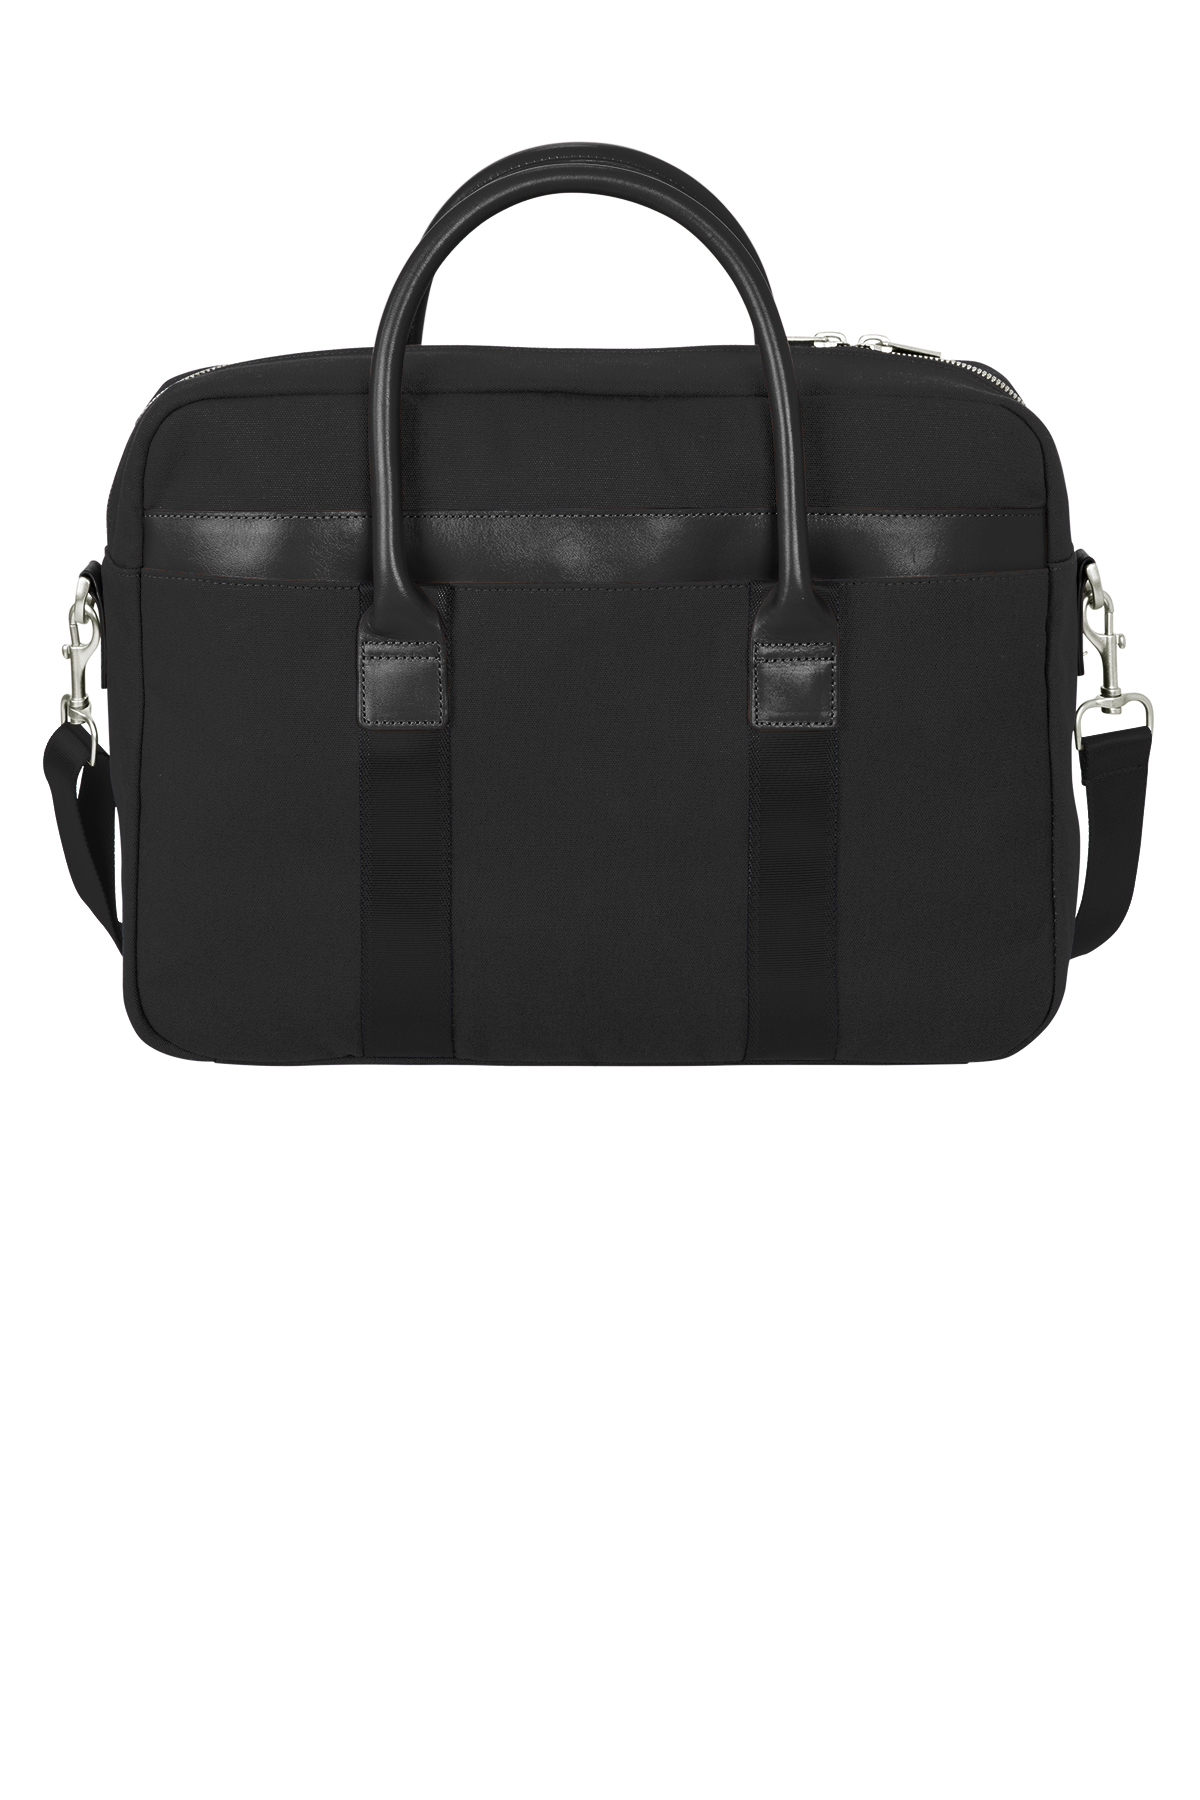 Brooks Brothers Wells Briefcase | Product | SanMar